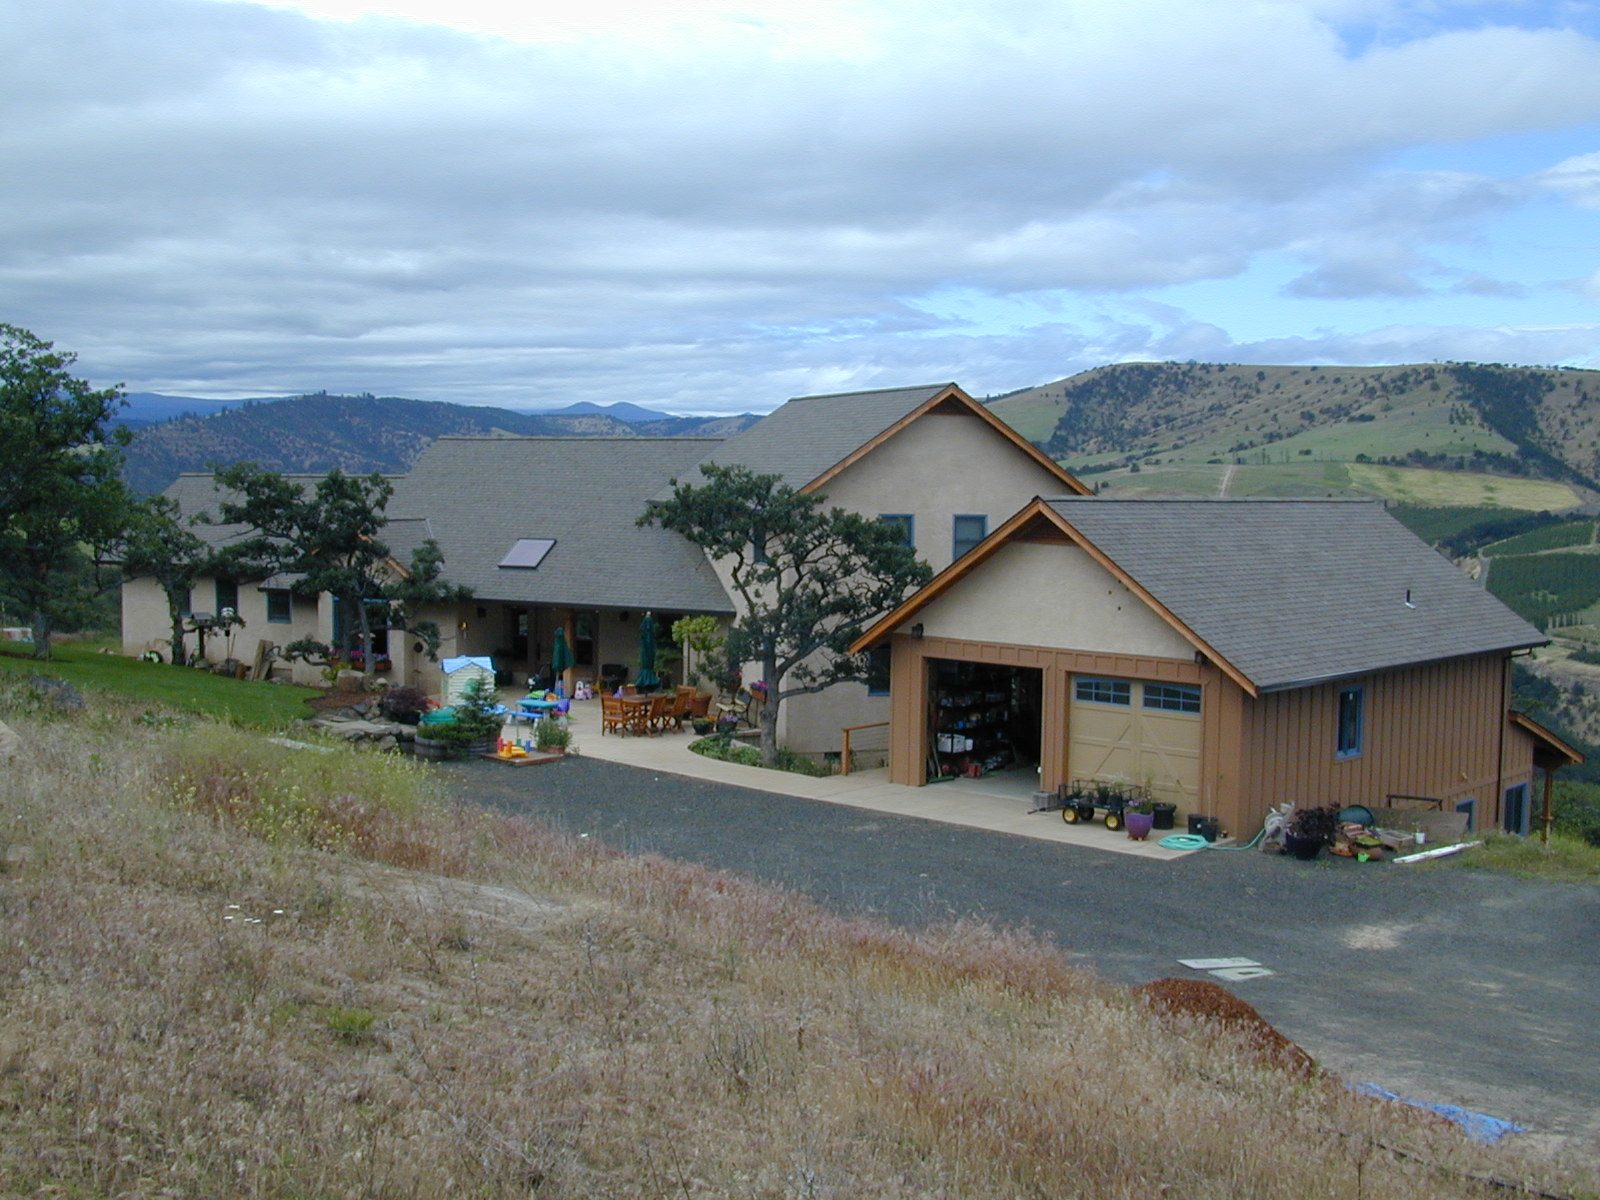 The Dalles House exterior